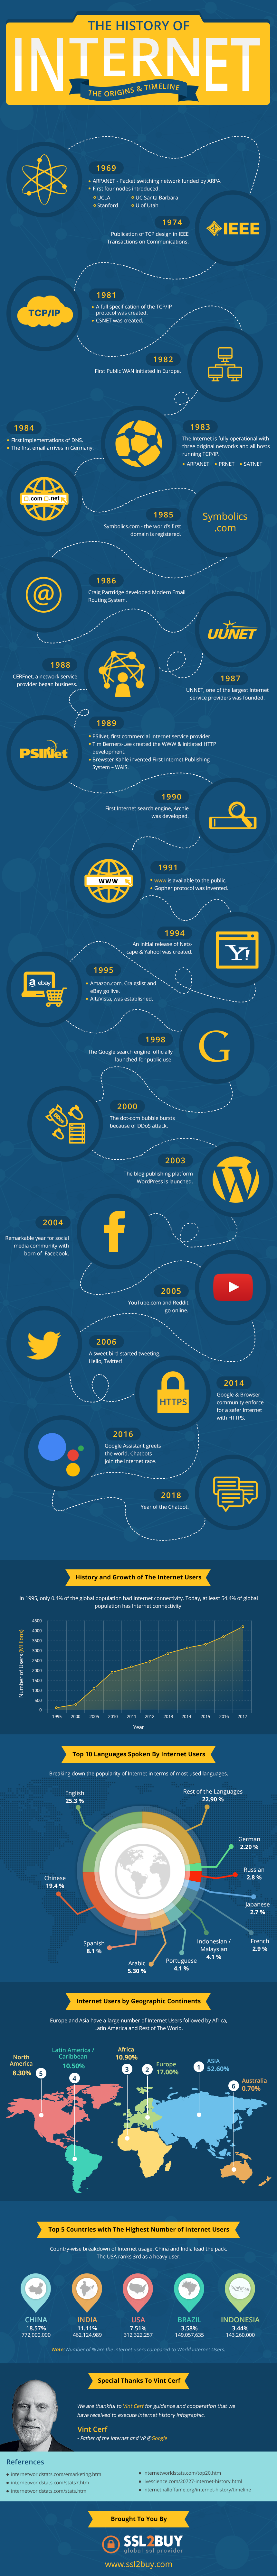 A Brief History Of The Internet – Origins and Timeline - (infographic)